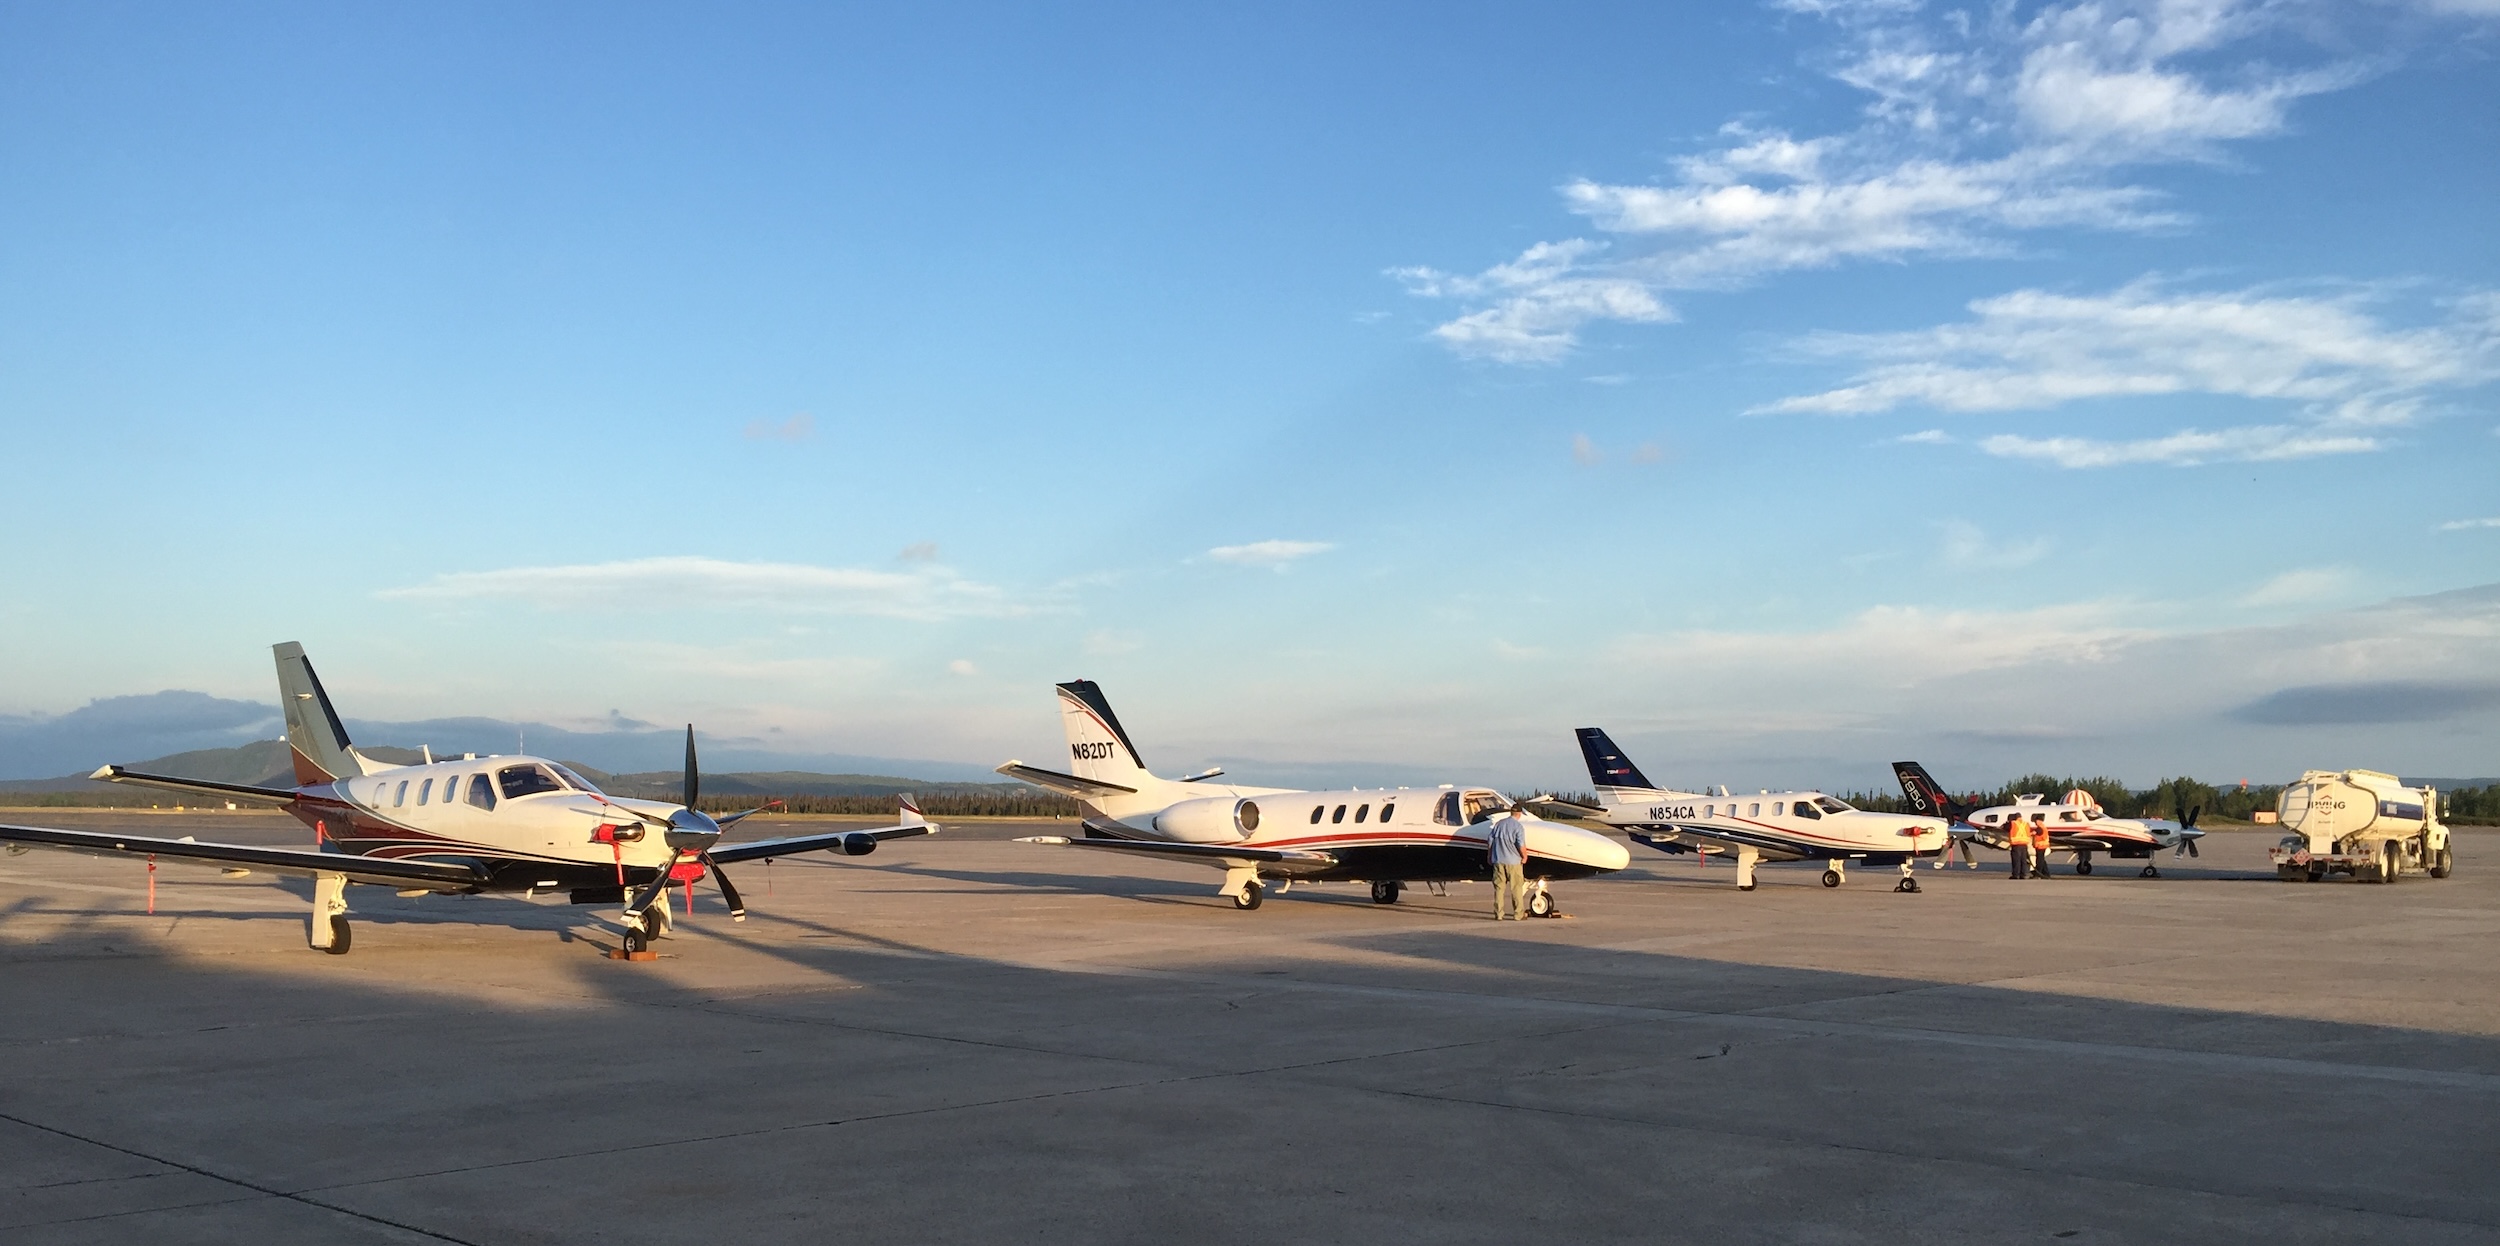 Group of owner-flown TBM and Citation airplanes on the ramp in Kuujjuaq, Canada, on a self-flying adventure